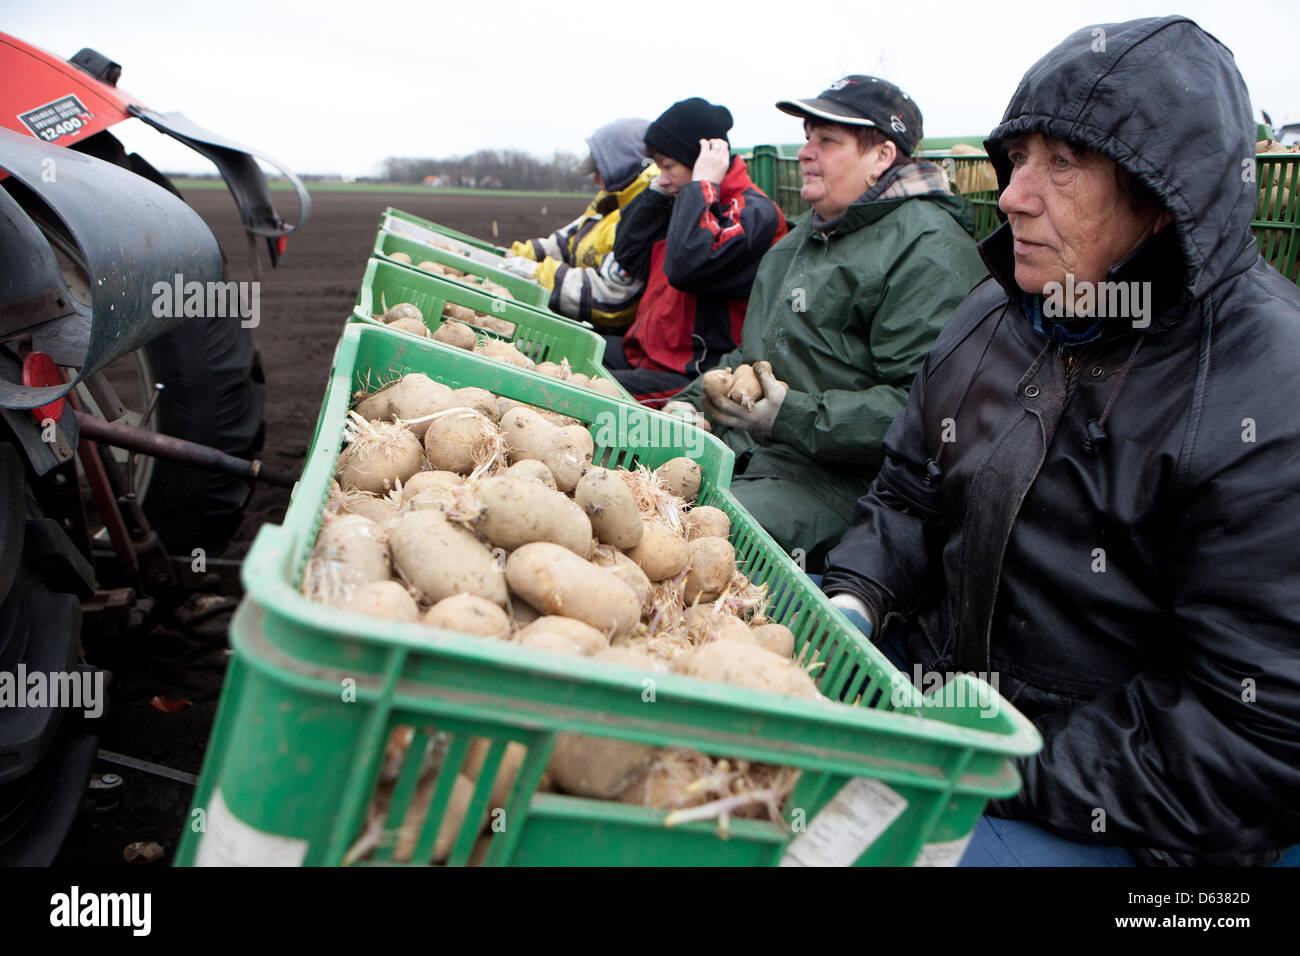 Spring planting potatoes, Farmers with potatoes in boxes Stock Photo